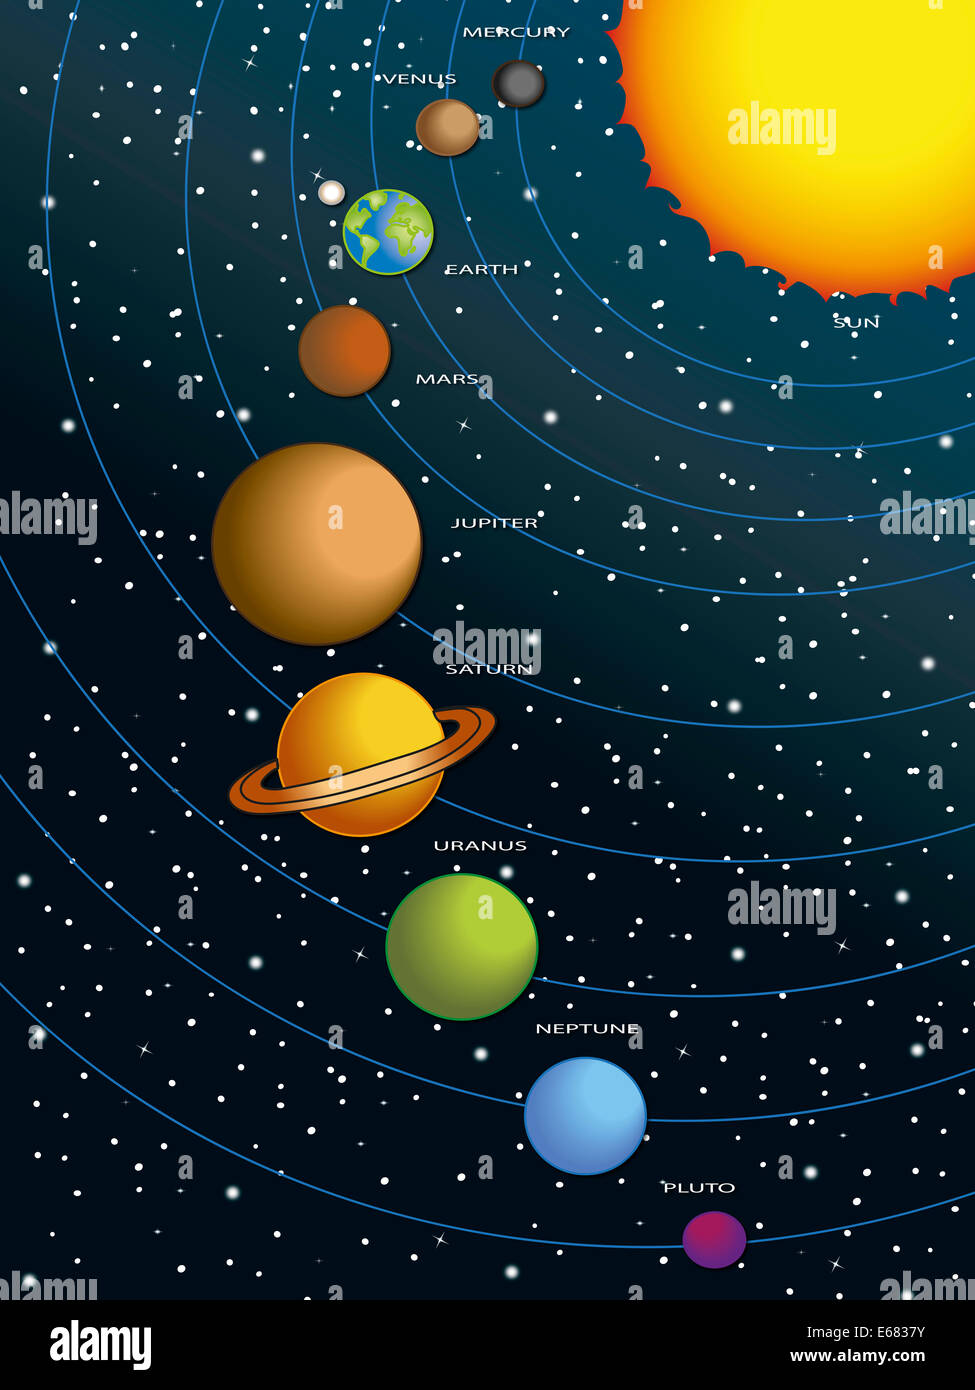 Illustration of solar system with sun and the planets. Stock Photo